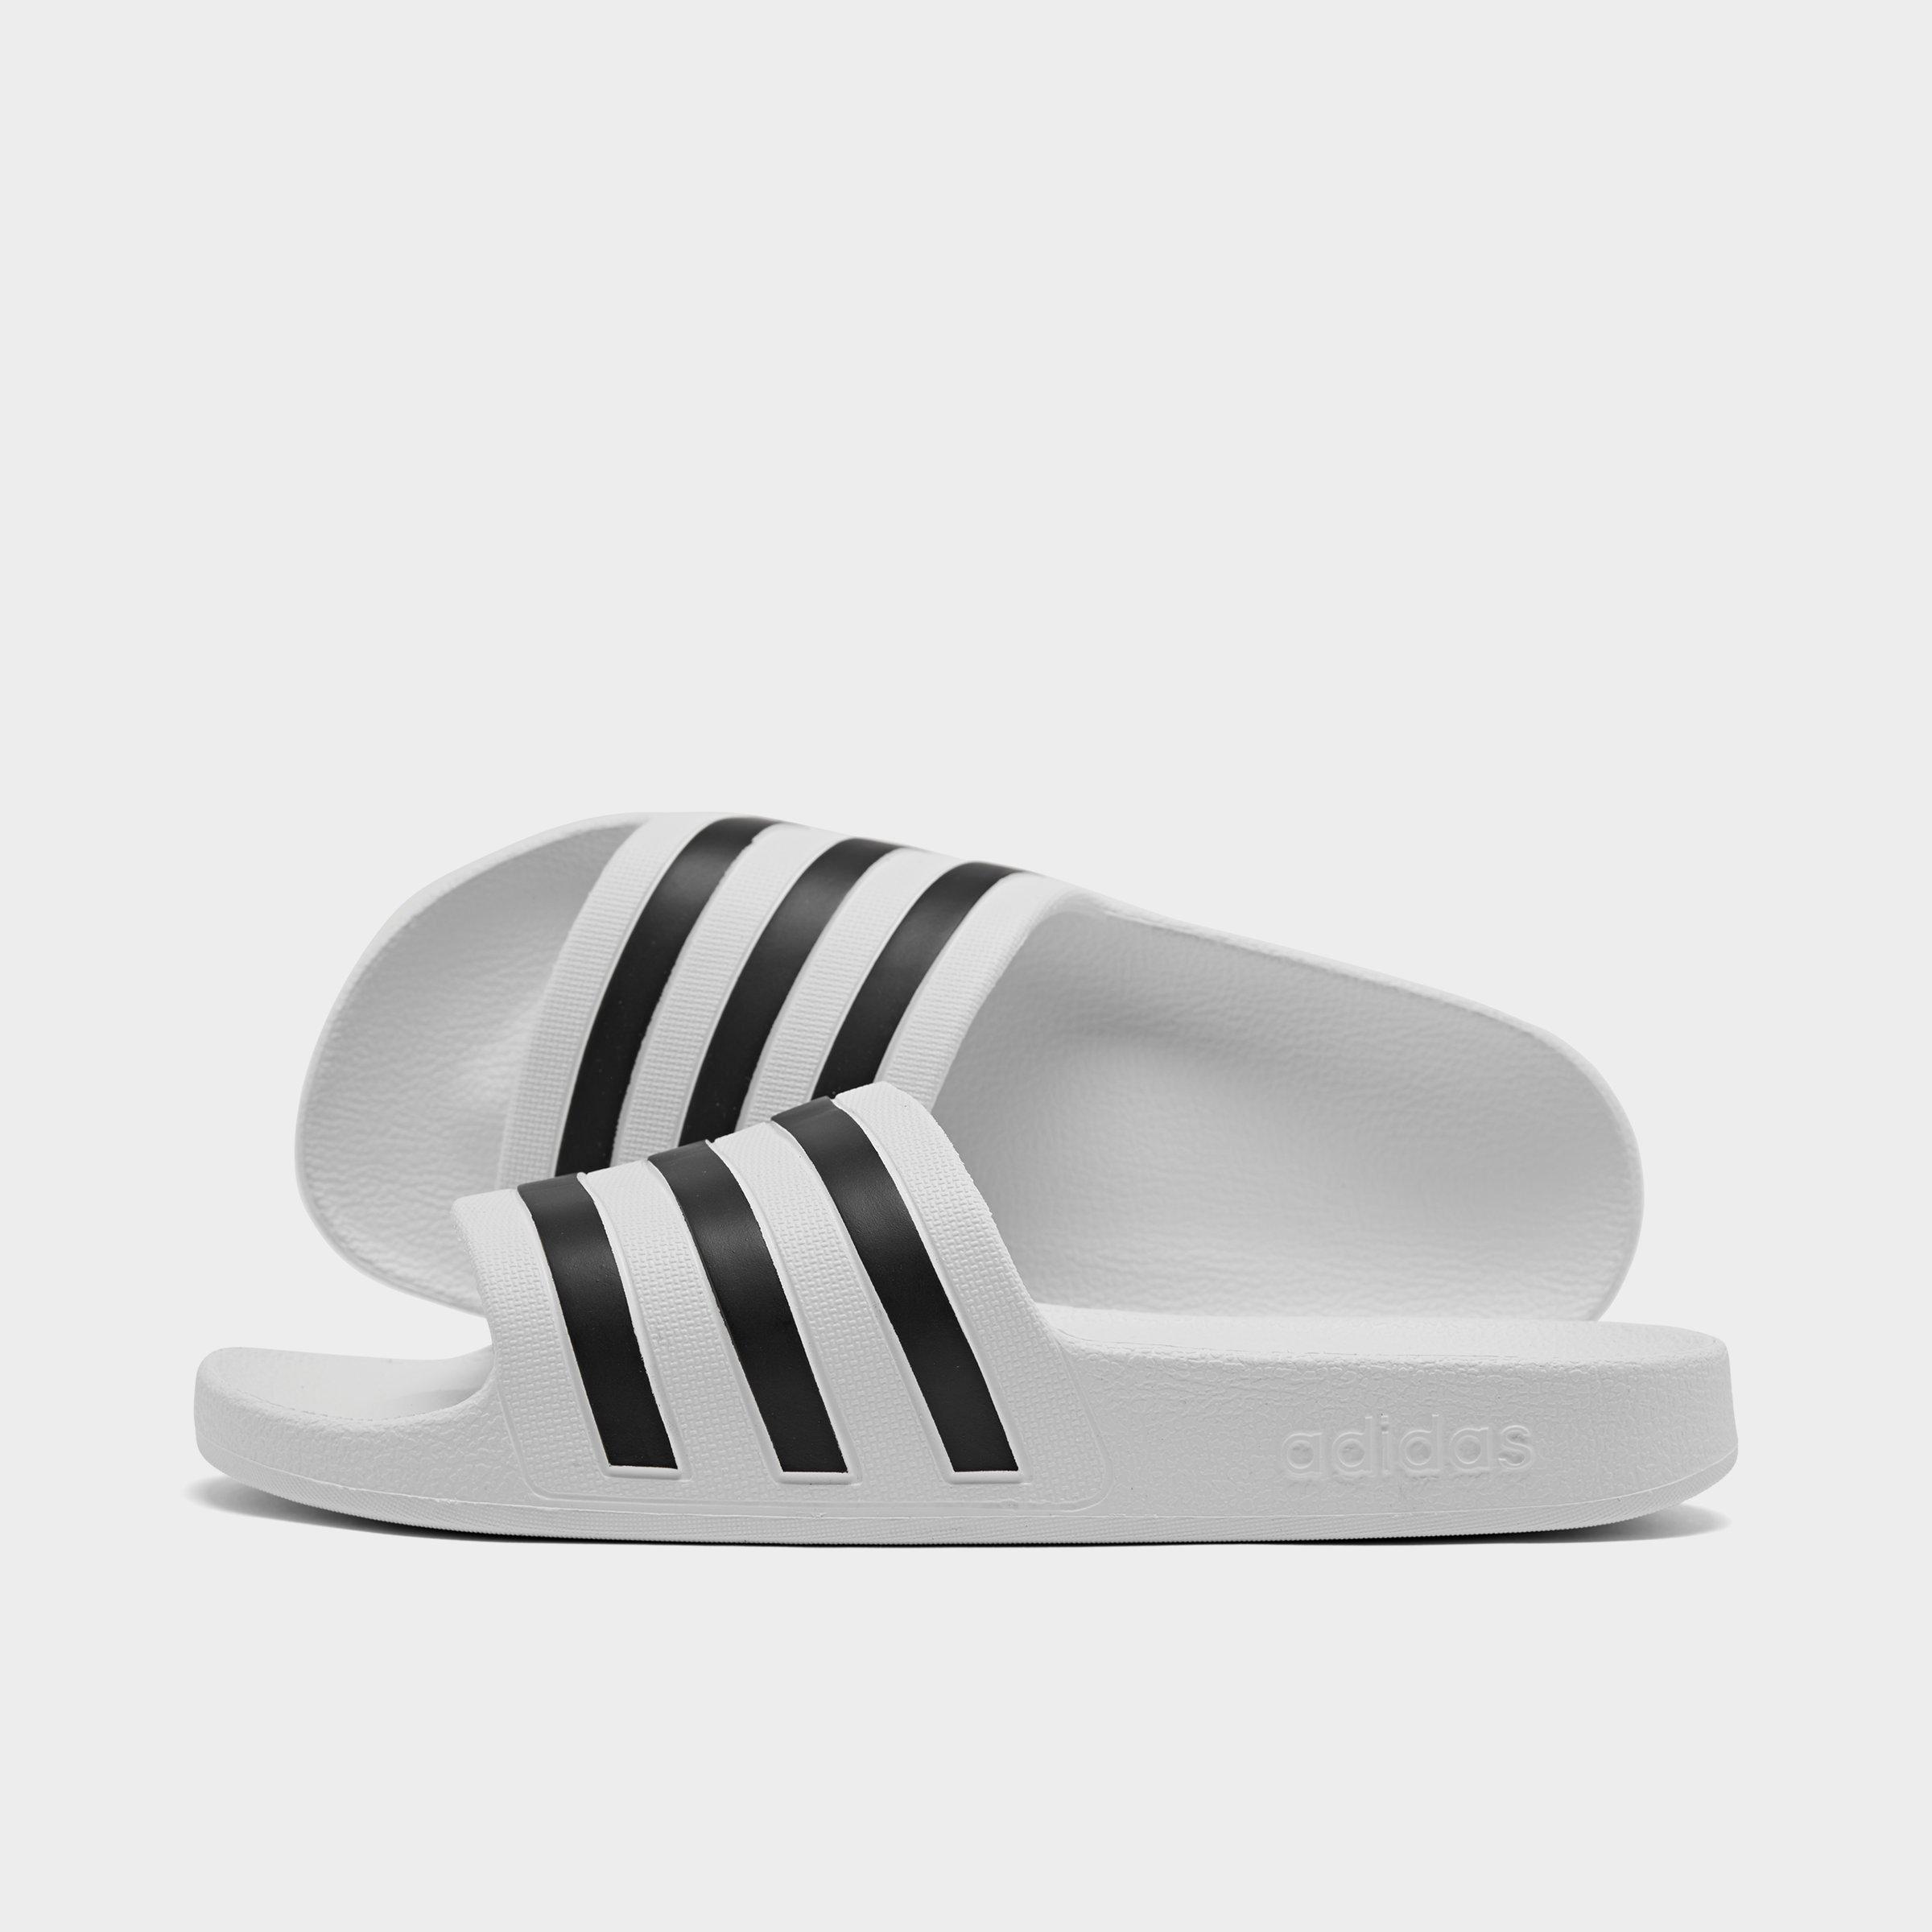 black and white adidas sandals